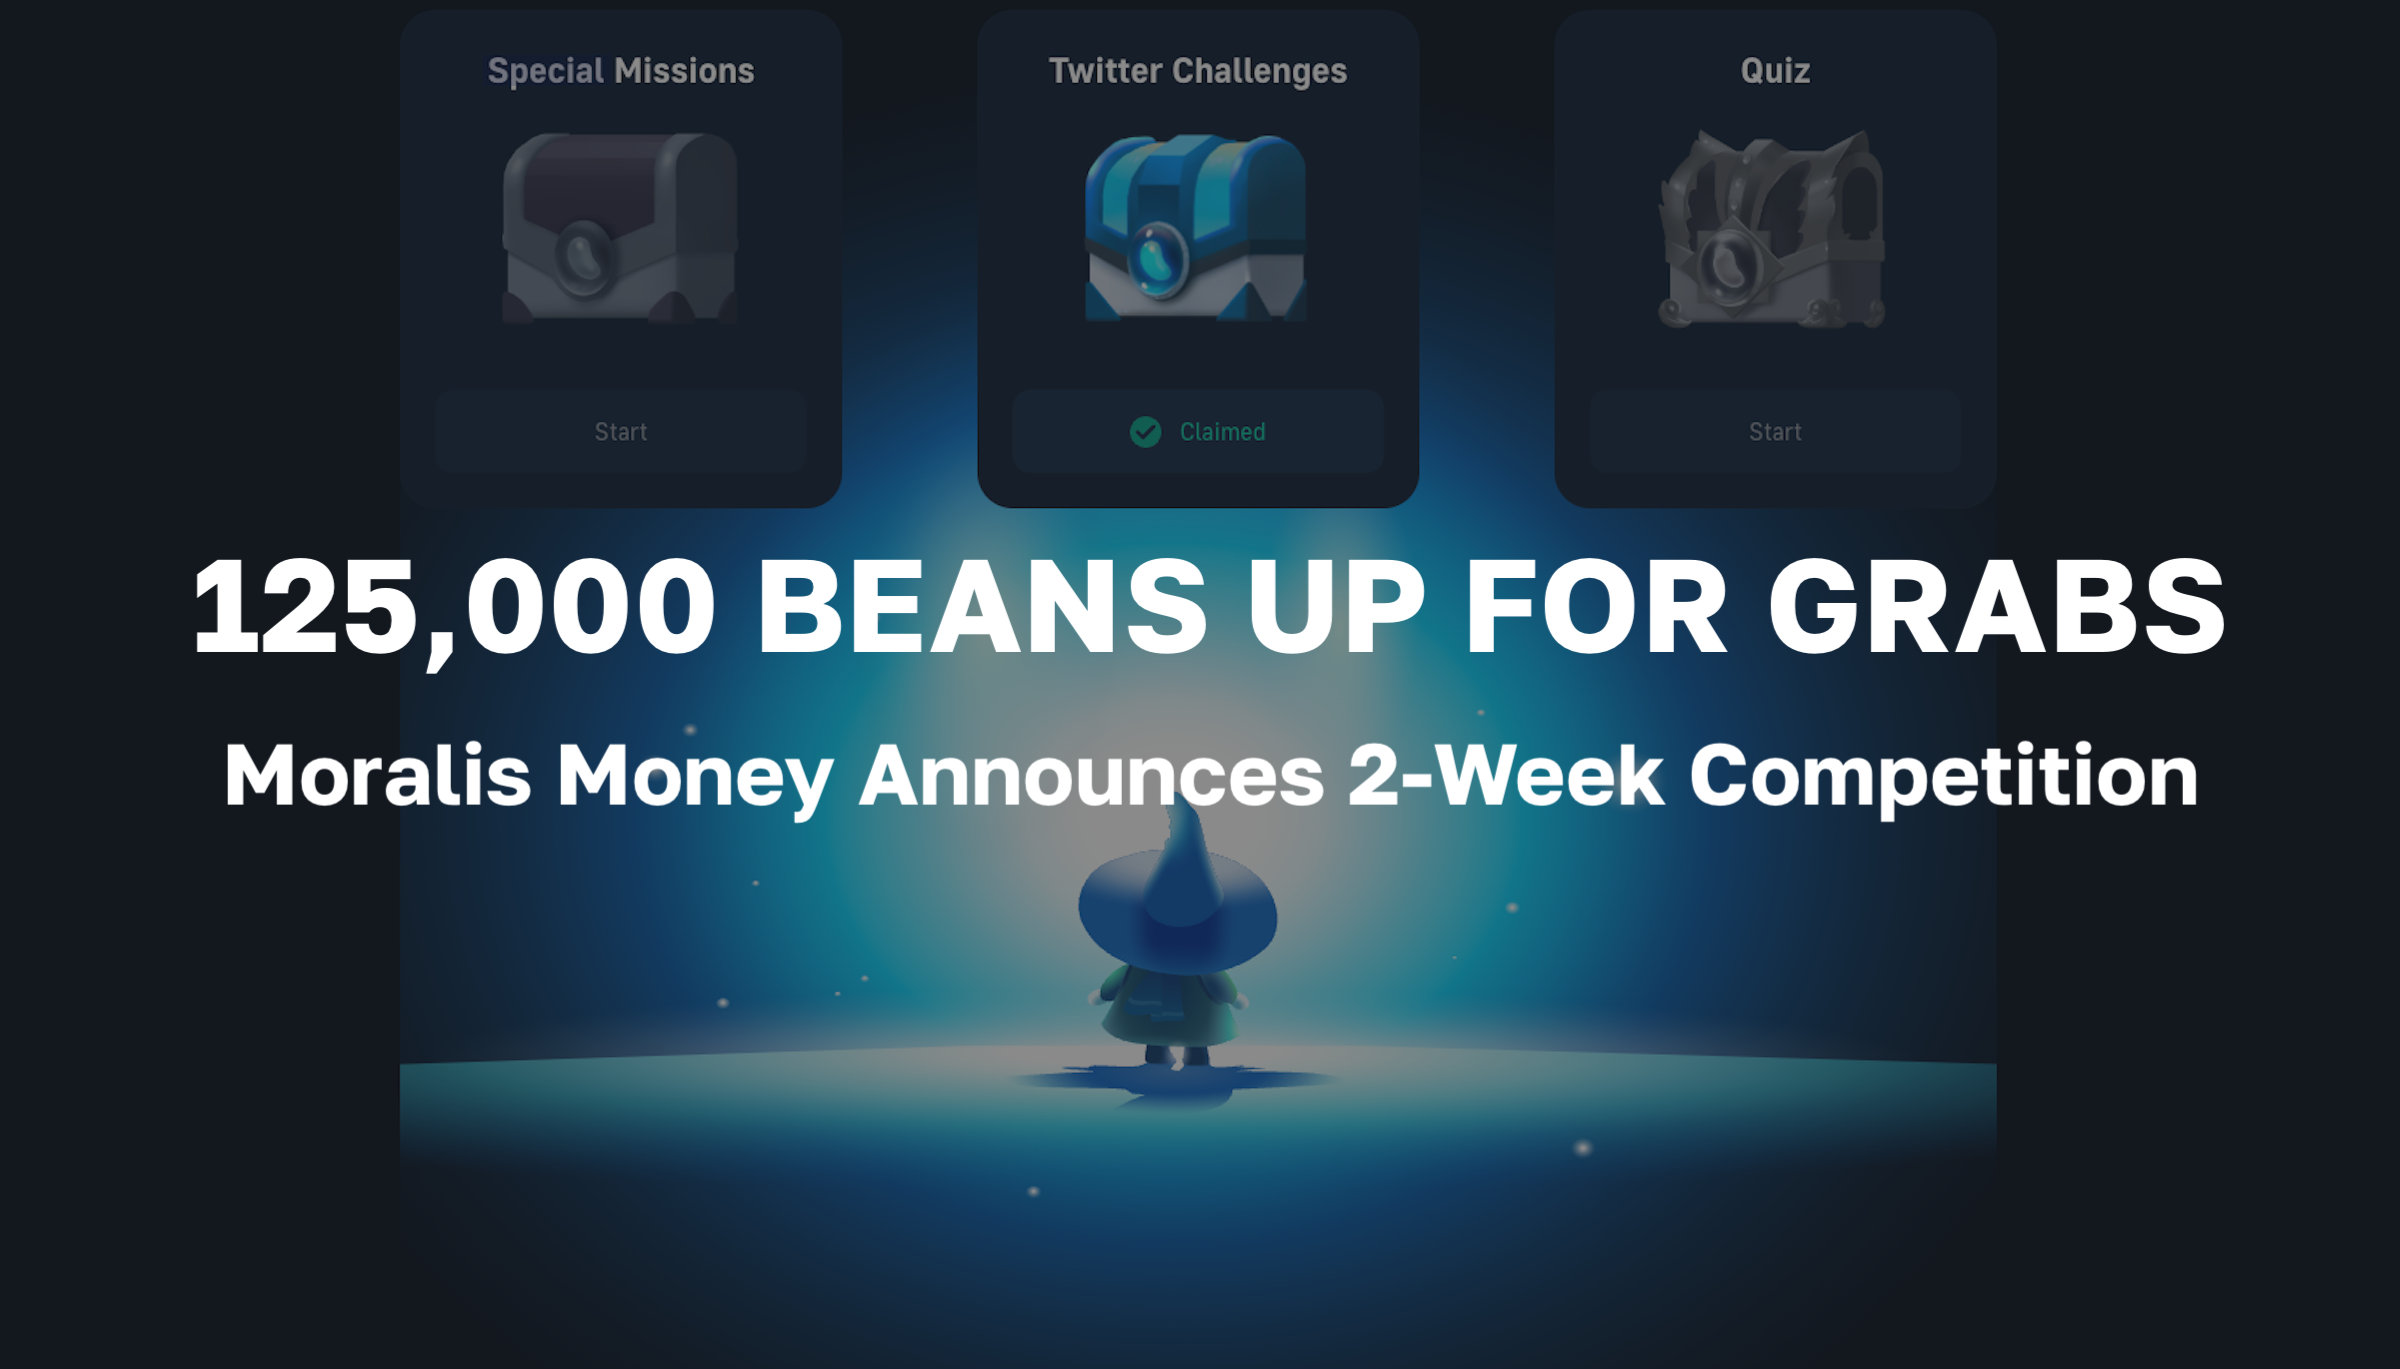 Moralis Money Announces 2-Week Competition for 125,000 Beans